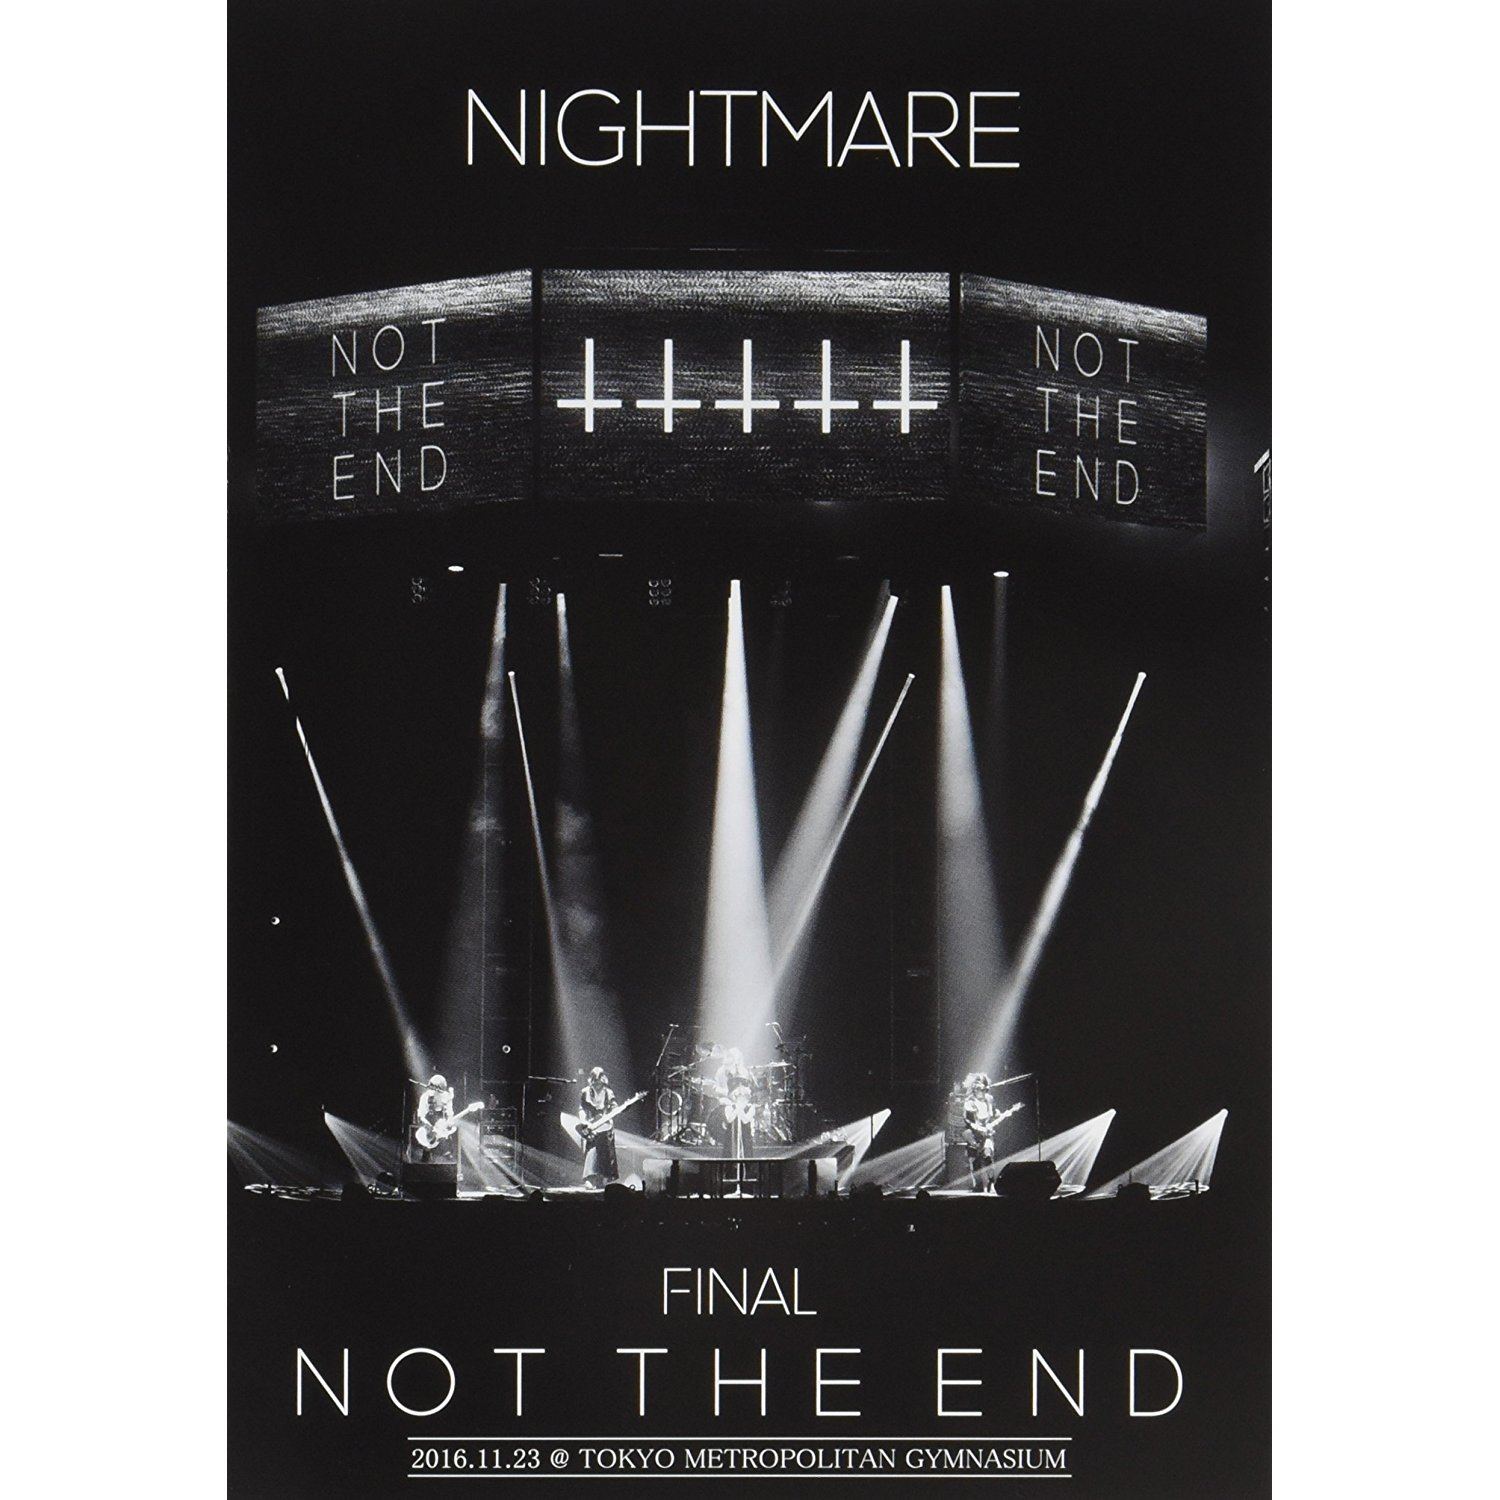 Final　The　Tokyo　End　Edition]　2016.11.23　Gymnasium　At　Metropolitan　[2DVD+CD　Limited　Nightmare　Not